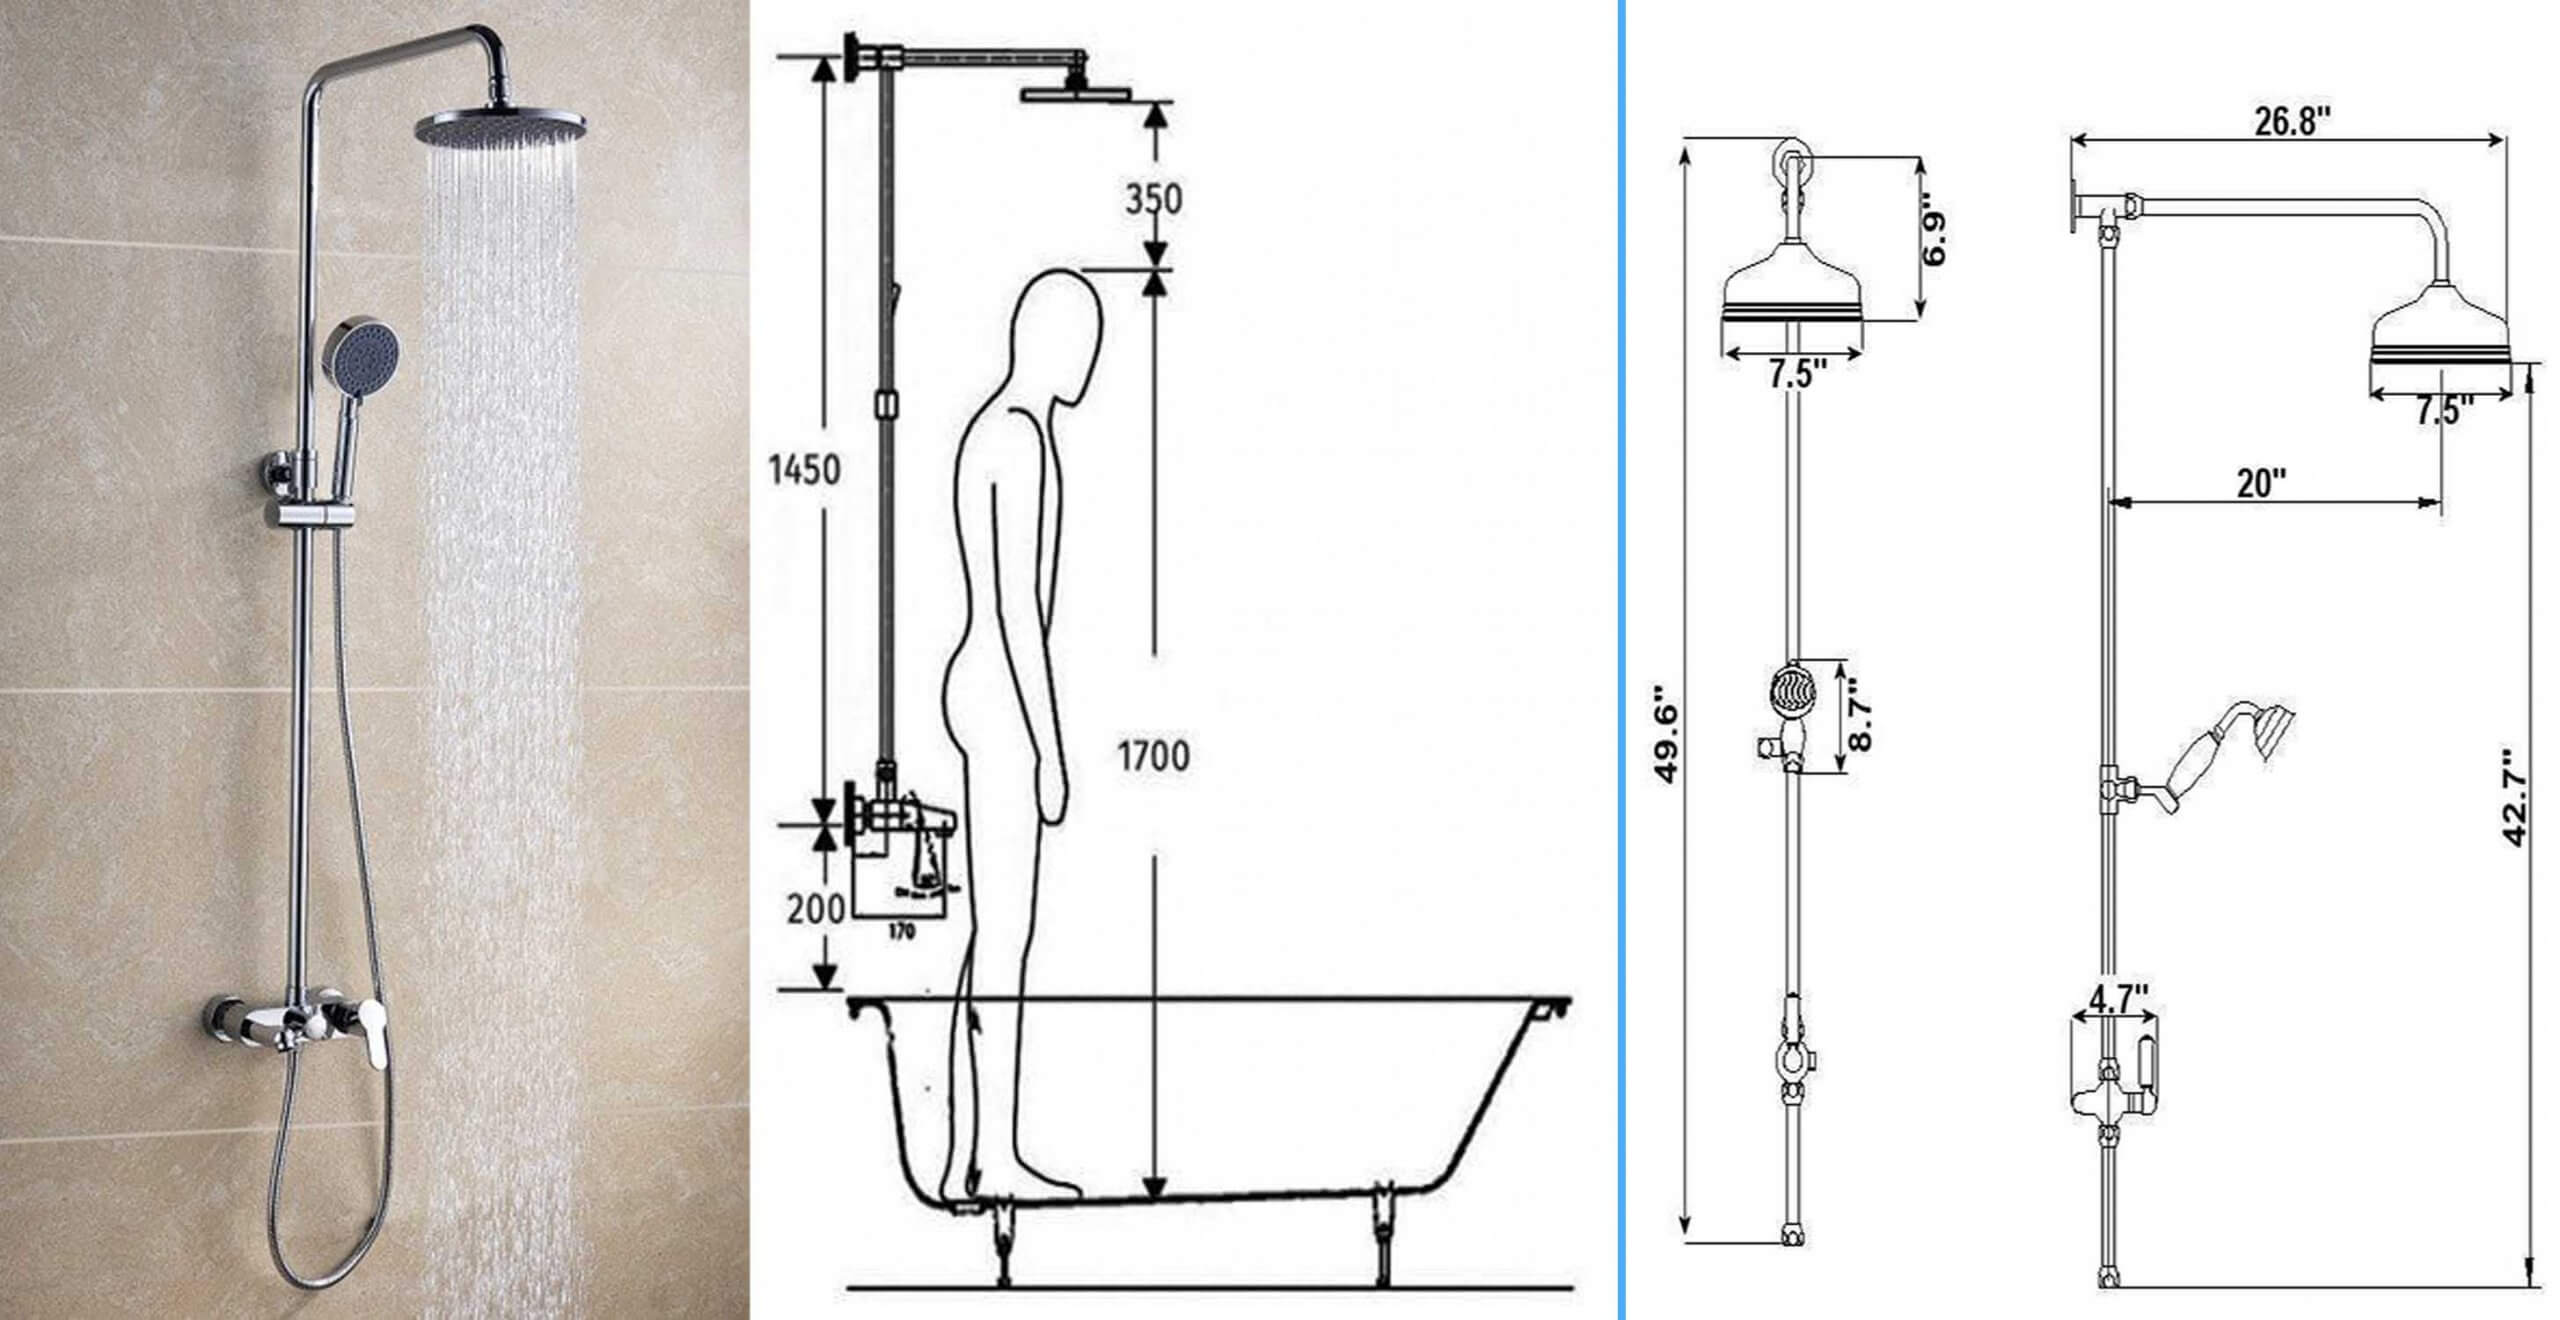 How To plumb Shower Installation? Engineering Discoveries